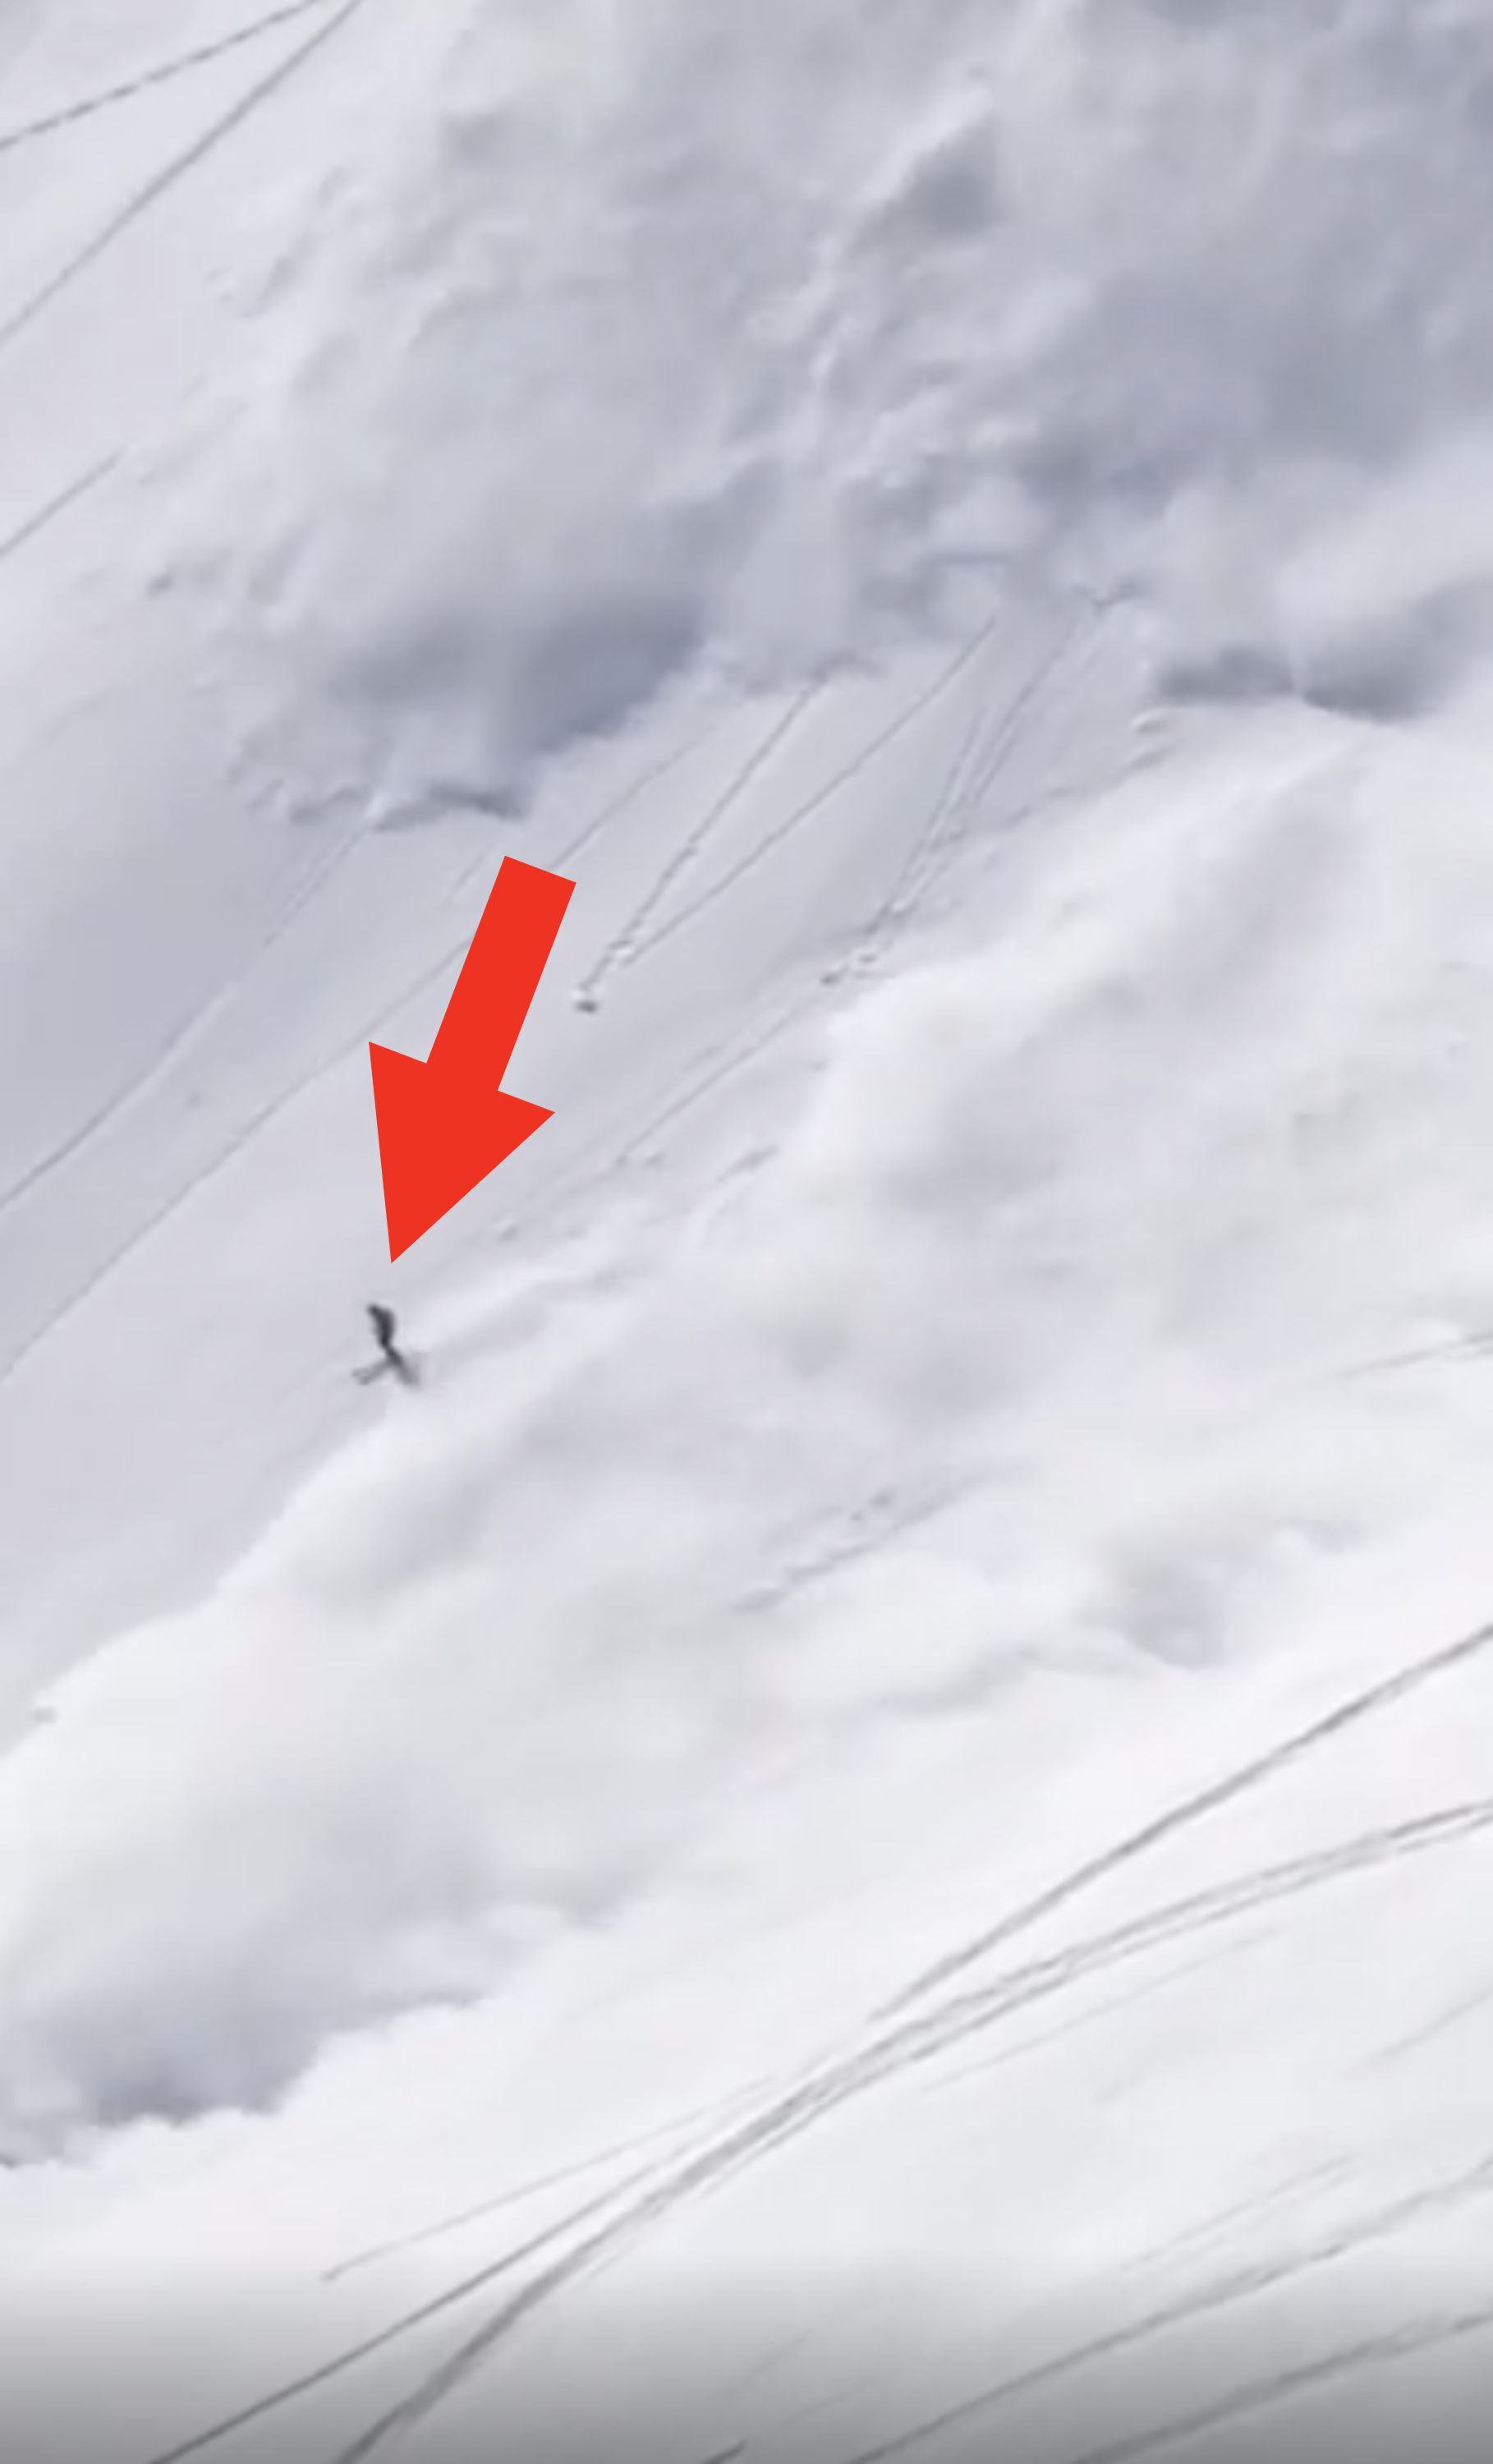 A skier outrunning an avalanche